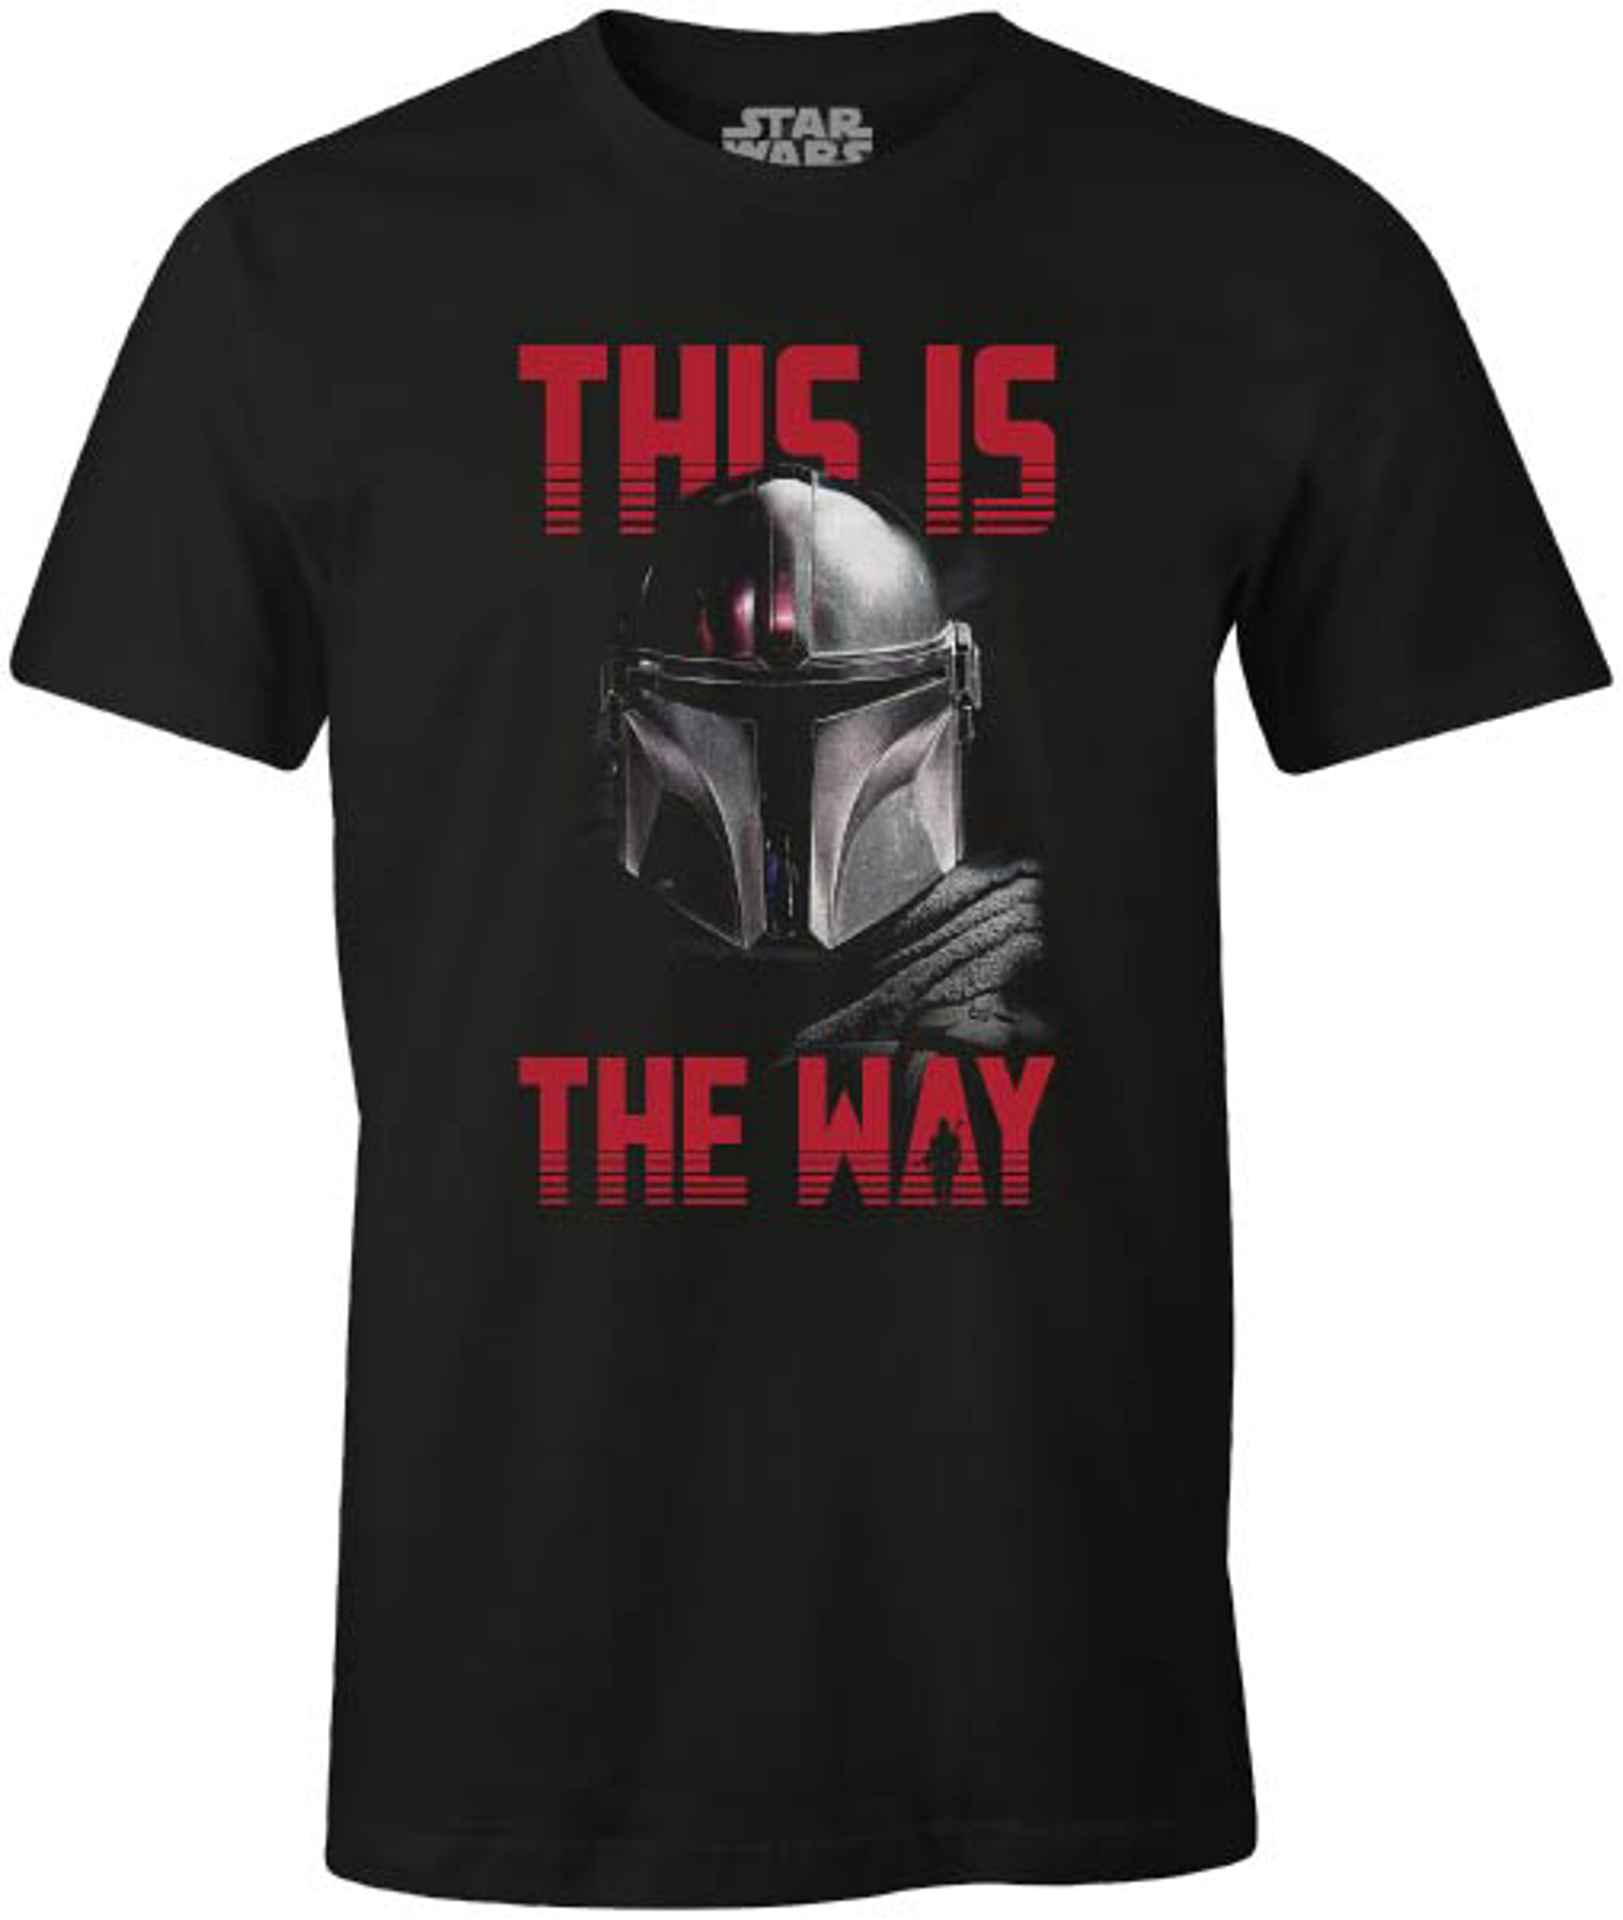 Star Wars  - T-shirt Noir Hommes - This is the way - XL